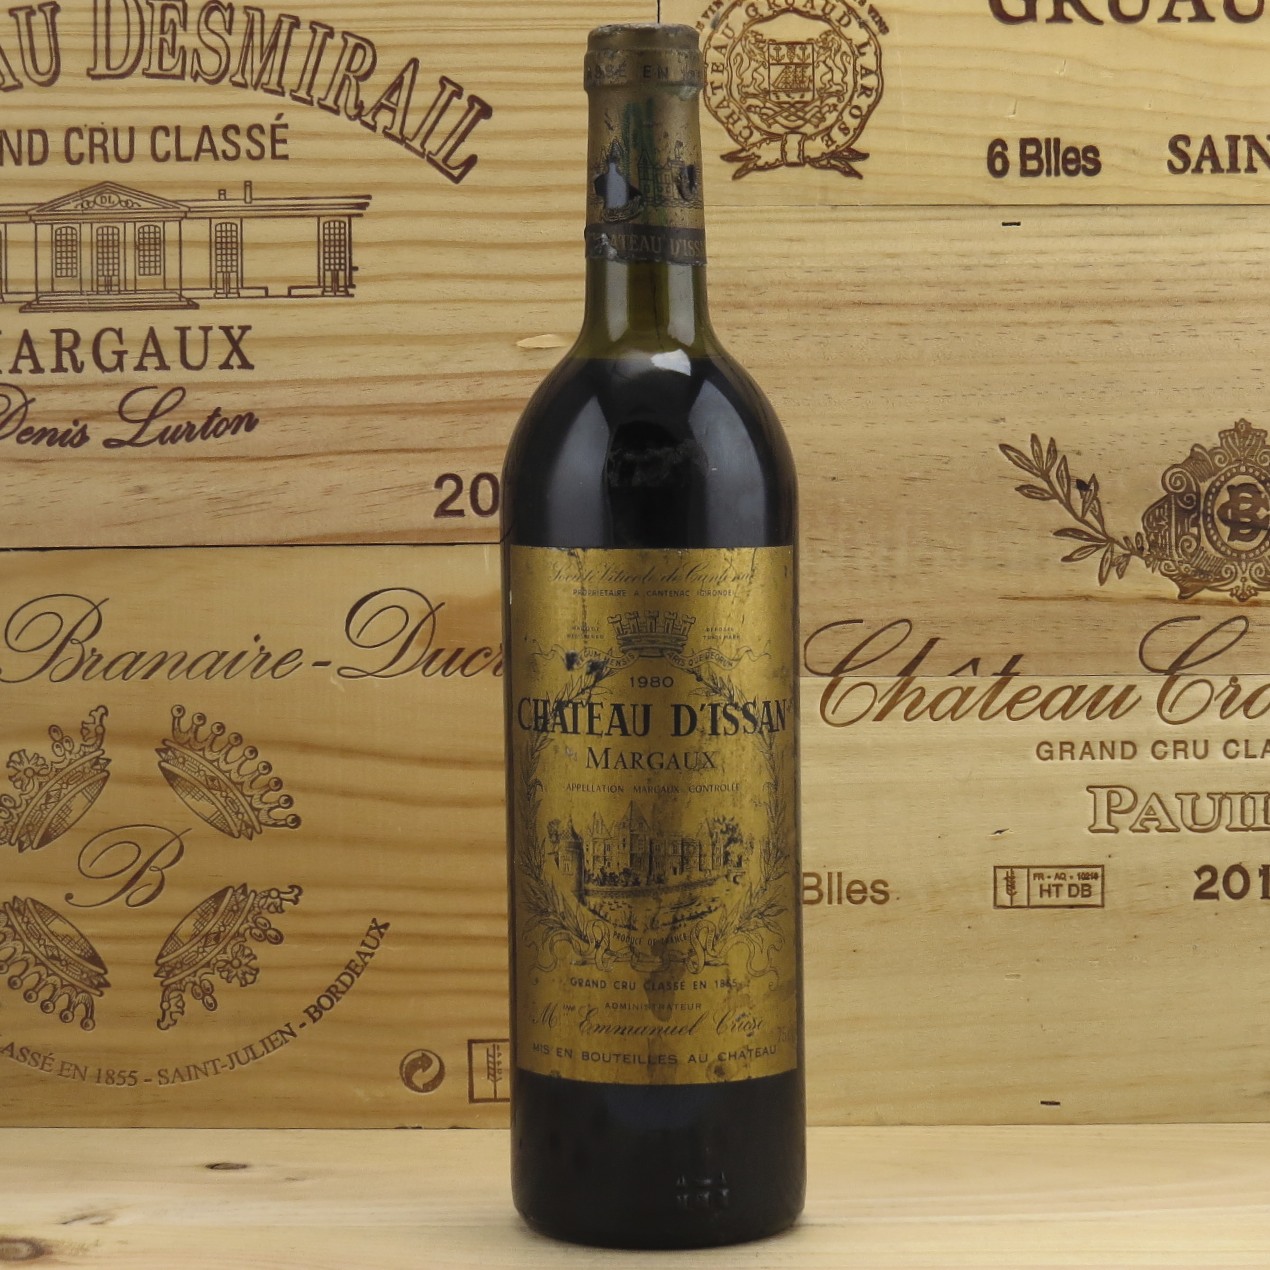 1980 Chateau d'Issan